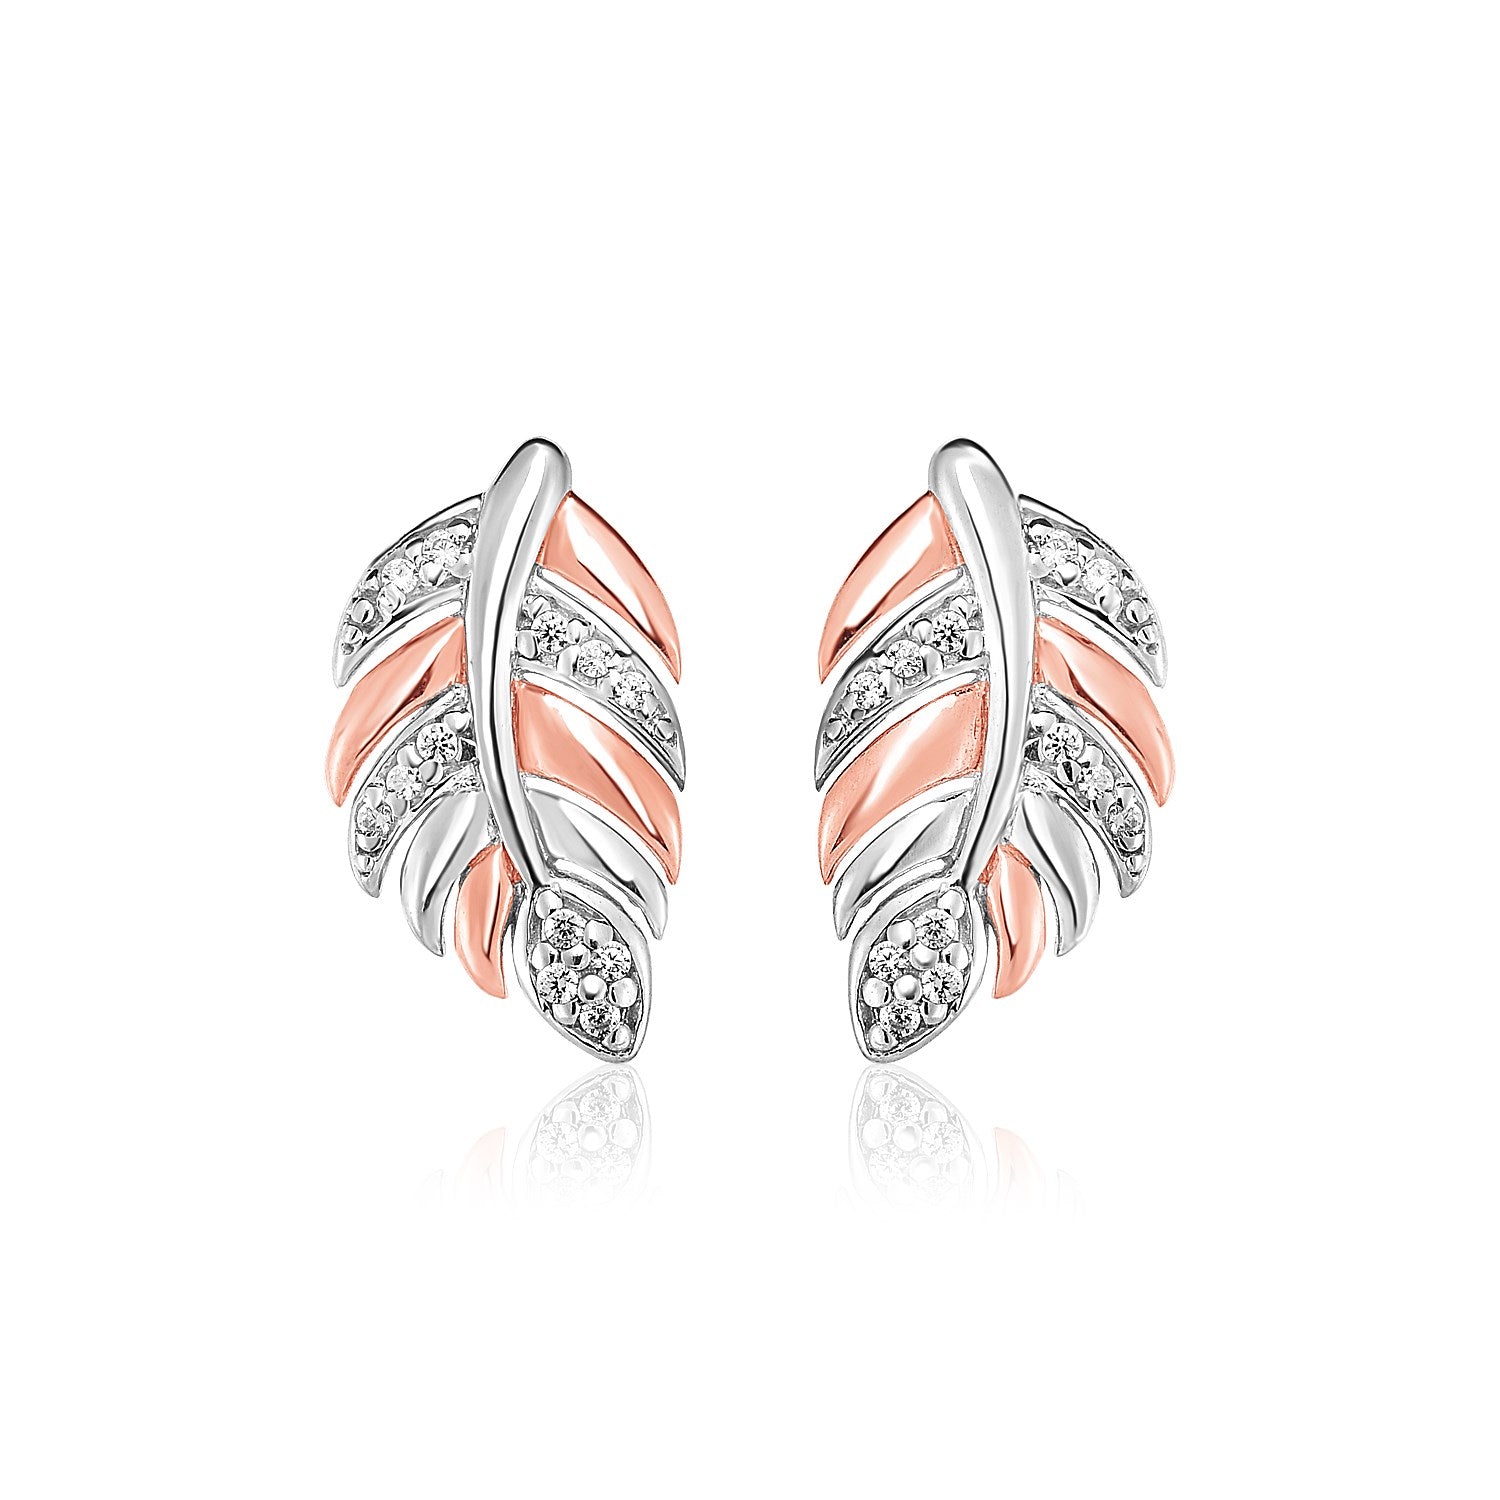 Sterling Silver Two Toned Leaf Earrings with Cubic Zirconias